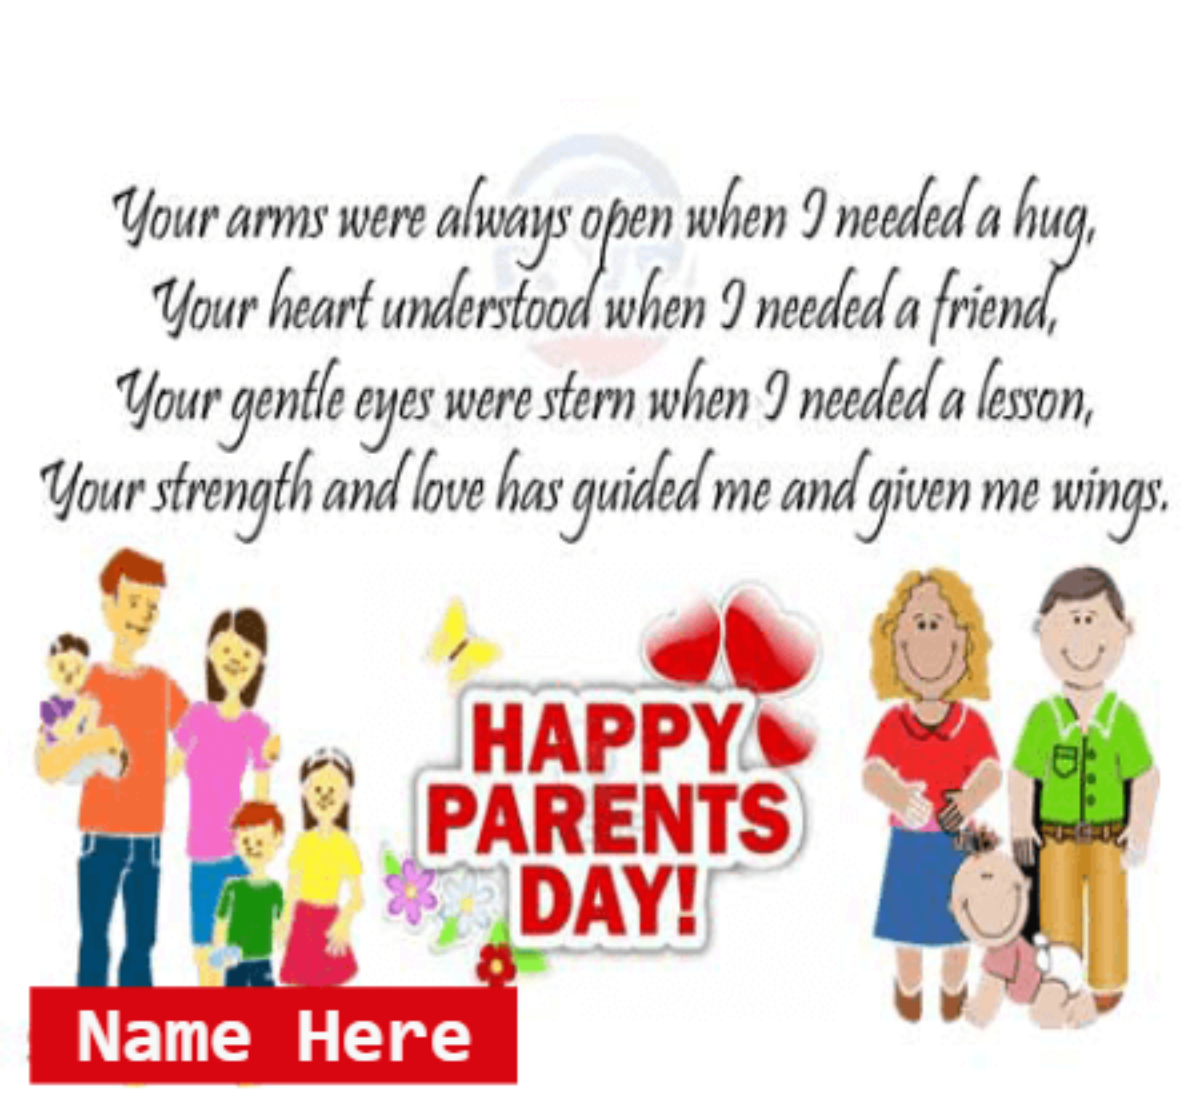 Quotes for Happy Parents Day - Parents Day Wishes With Name